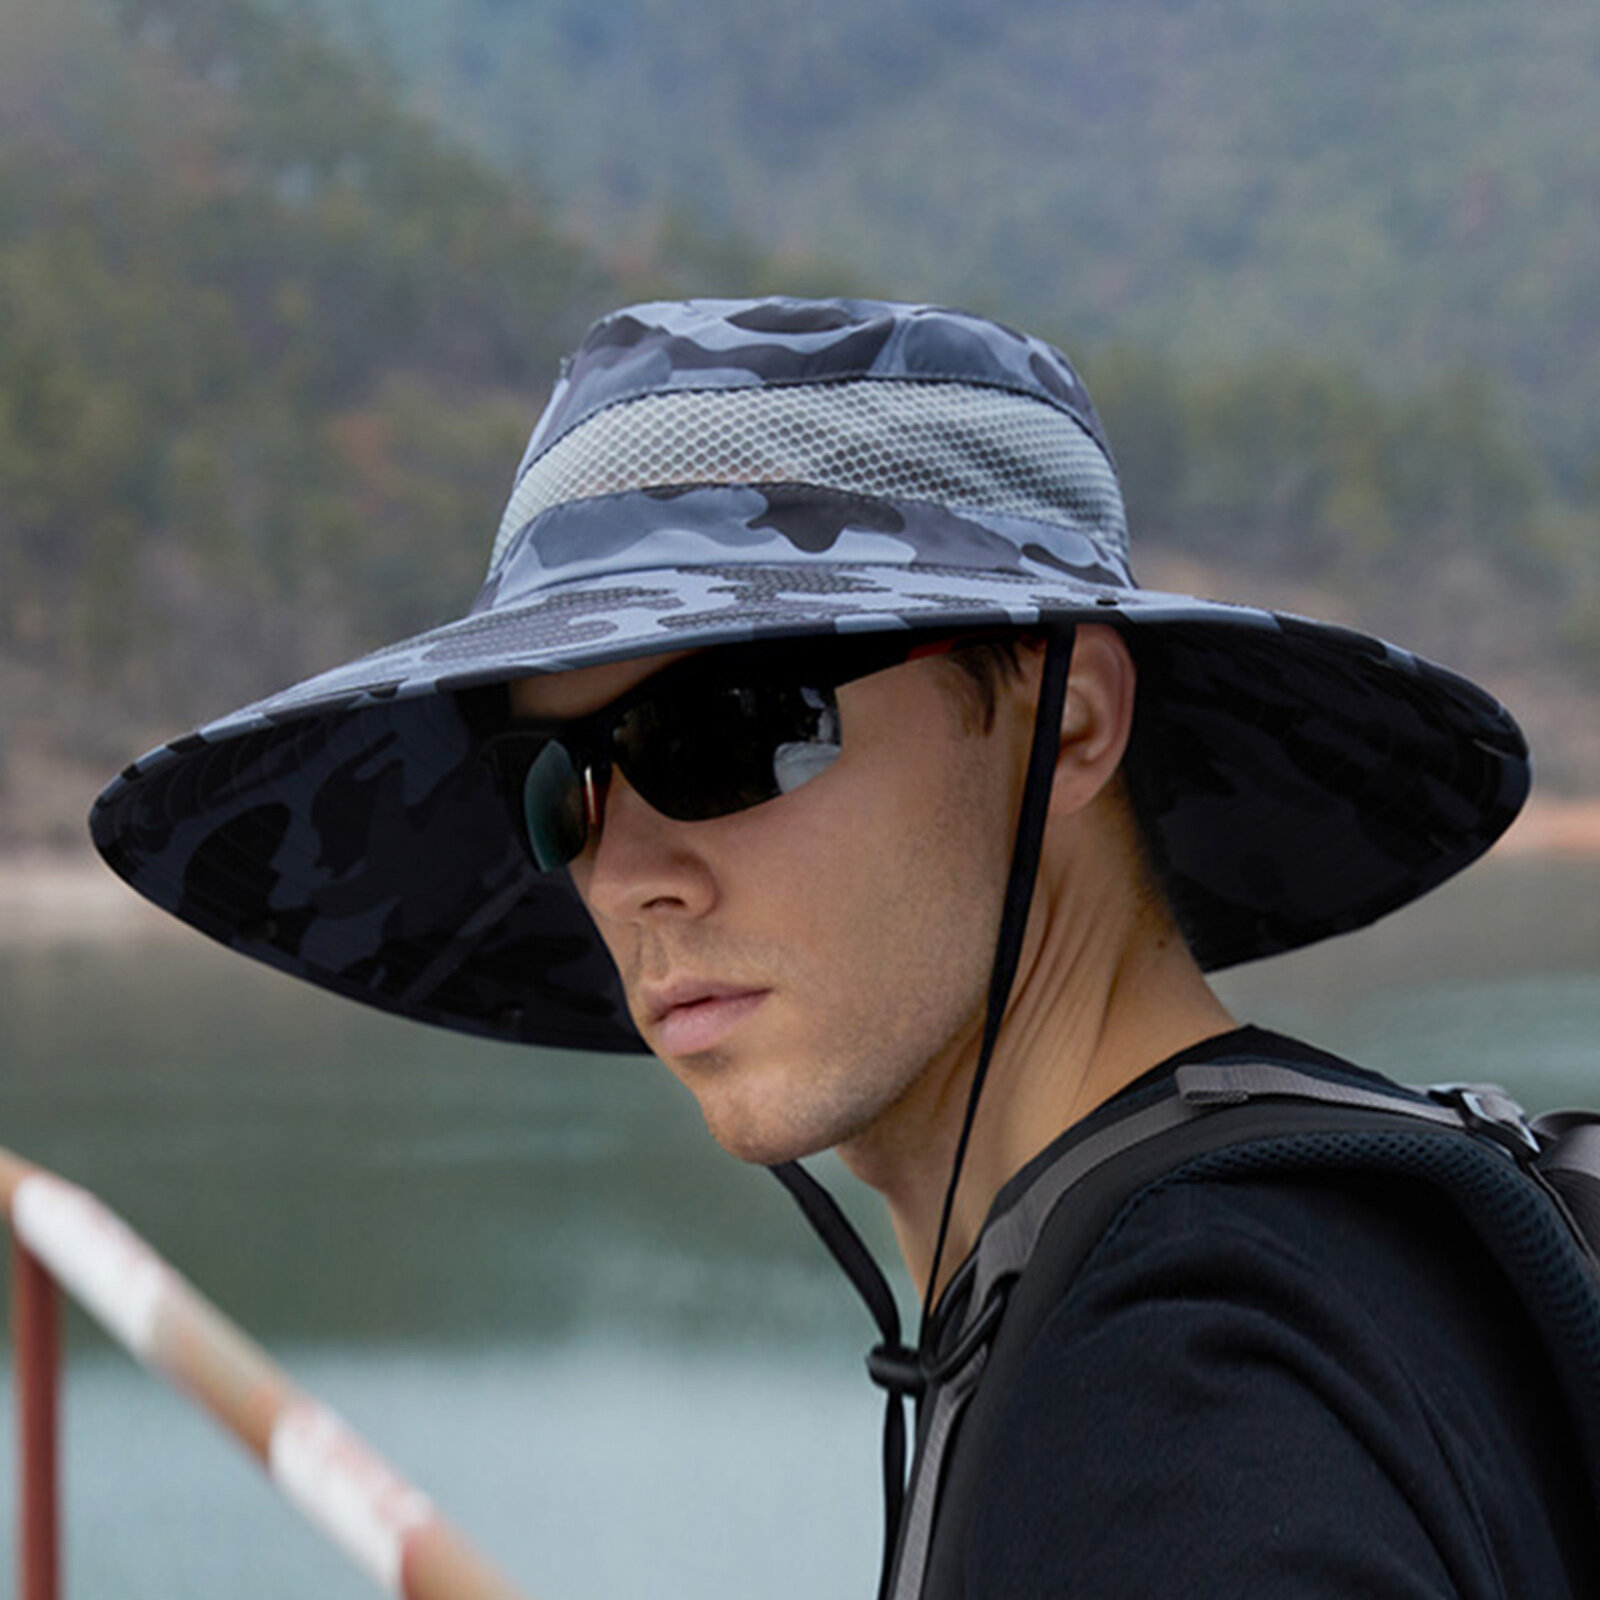 Unisex Polyester Camouflage Casual Outdoor Breathable Brim Extended Foldable Quick Dry Sunshade Bucket Hats